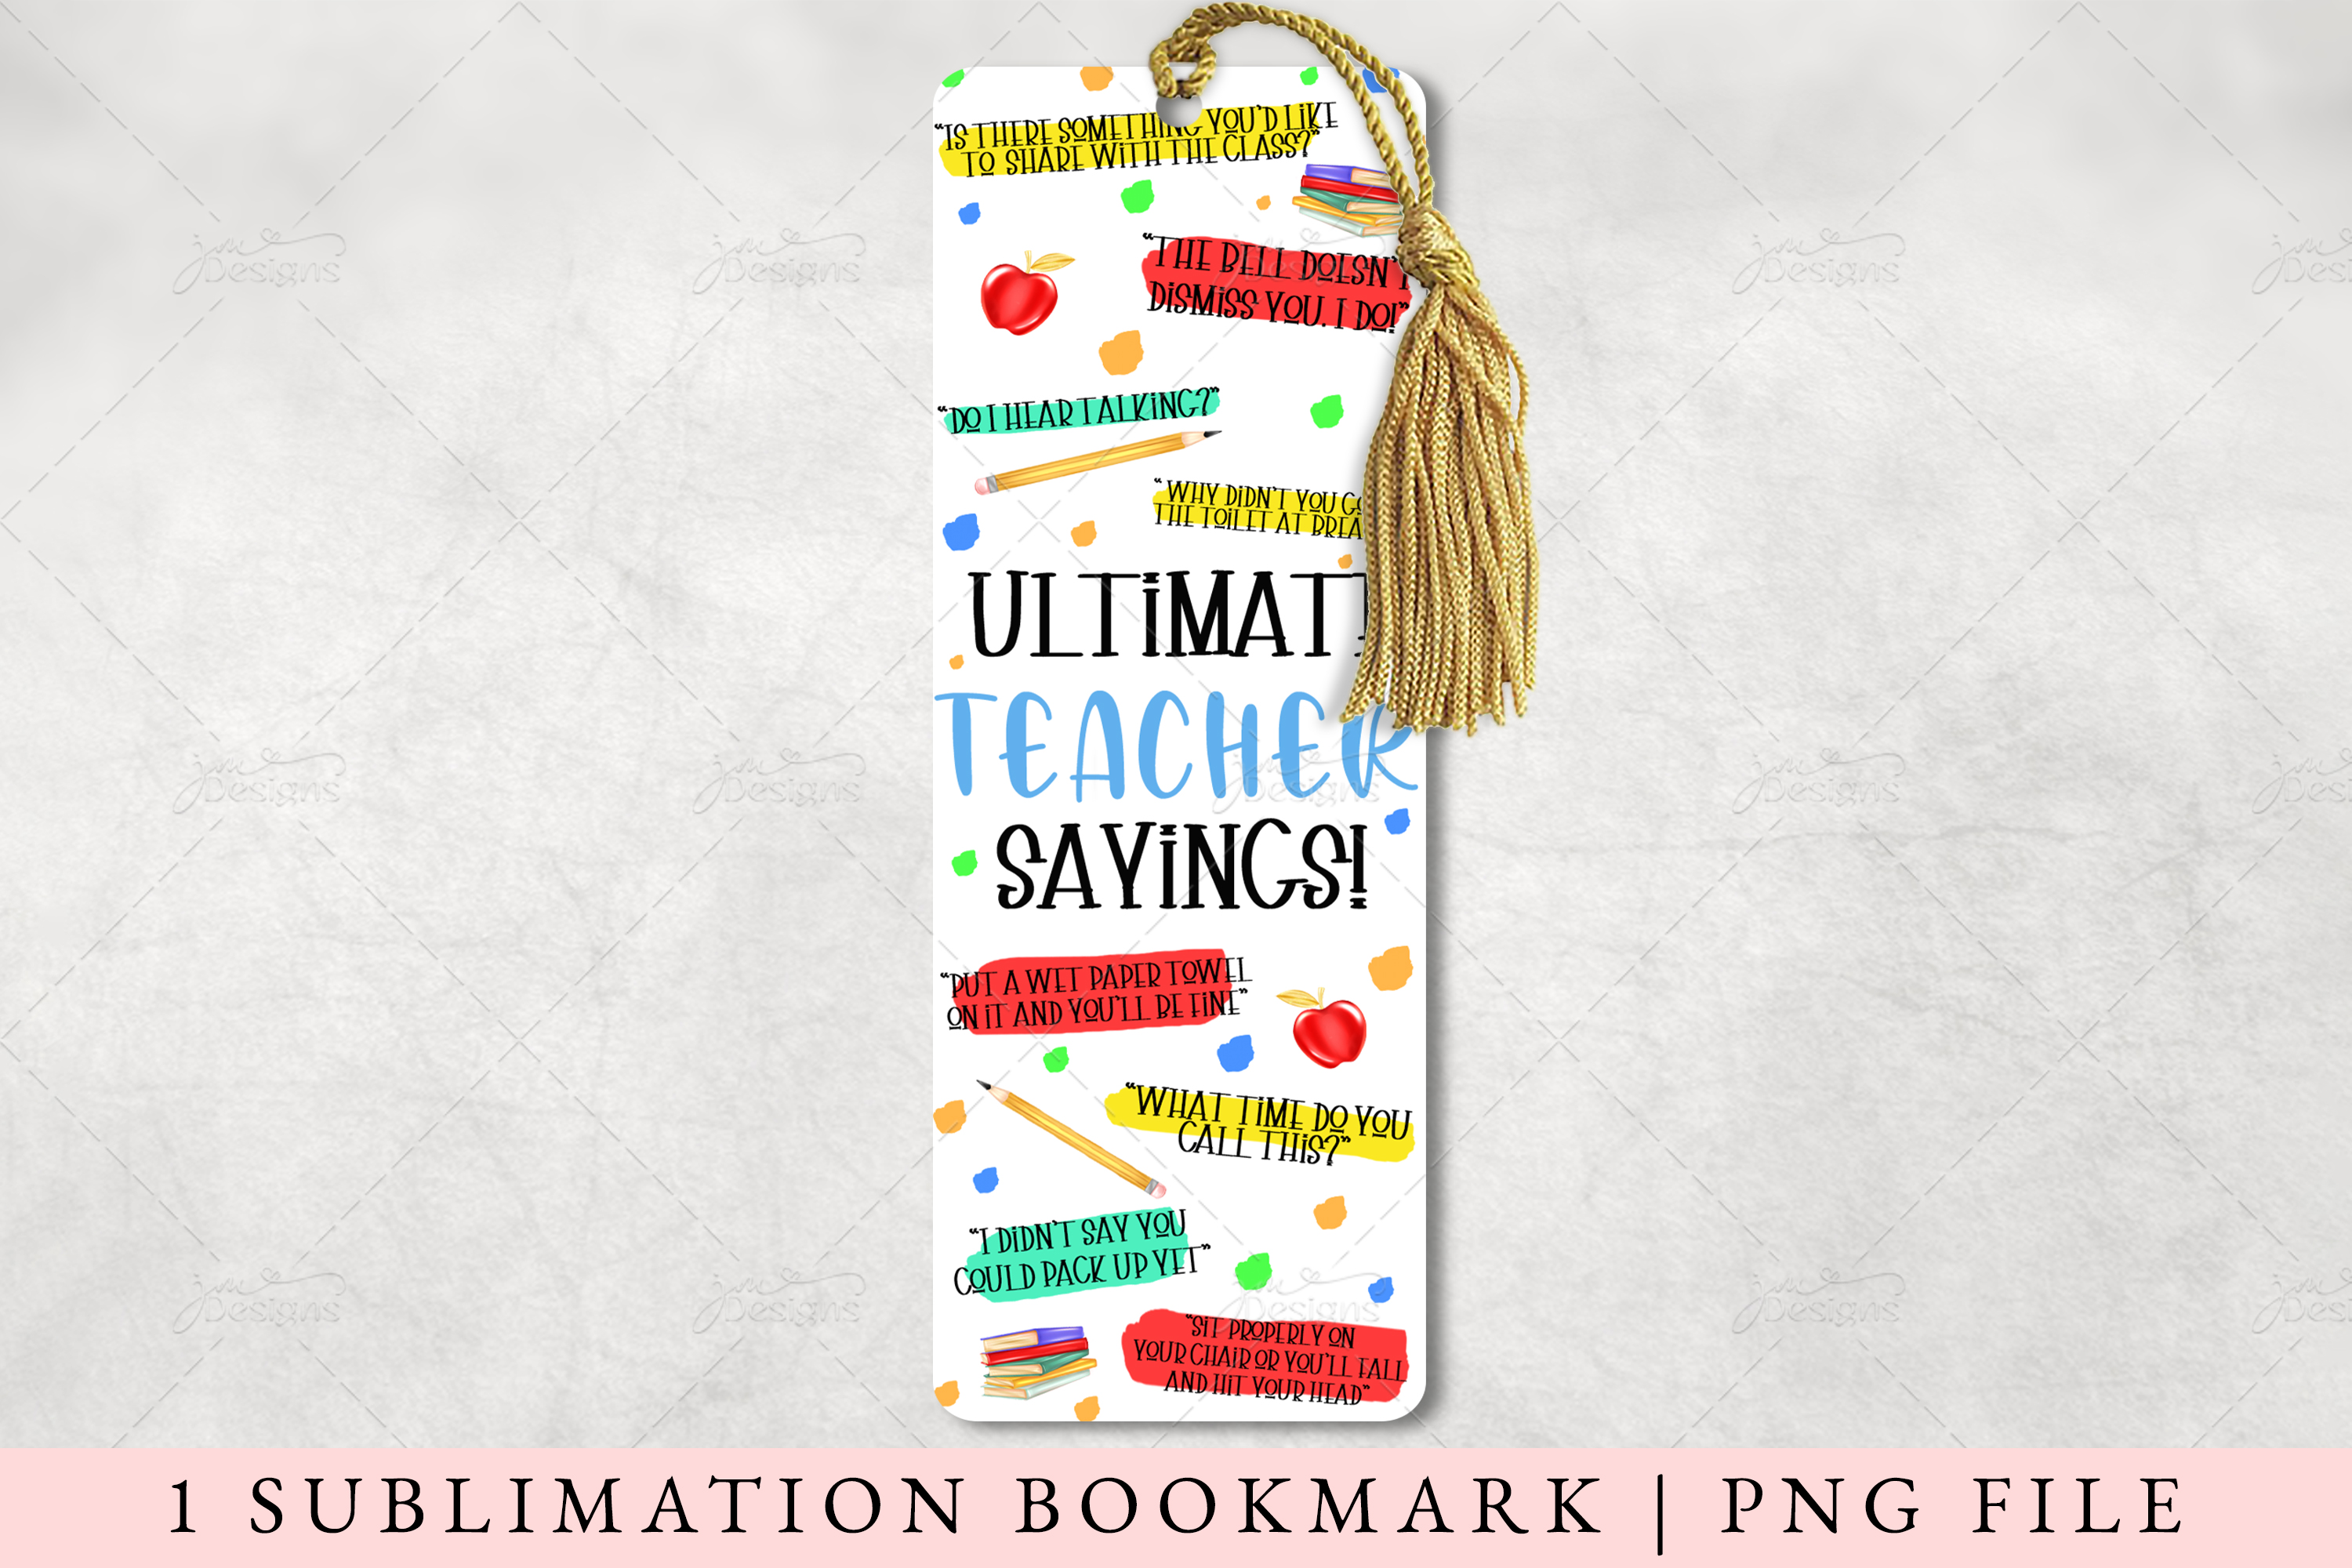 Sublimation bookmark pack of 10